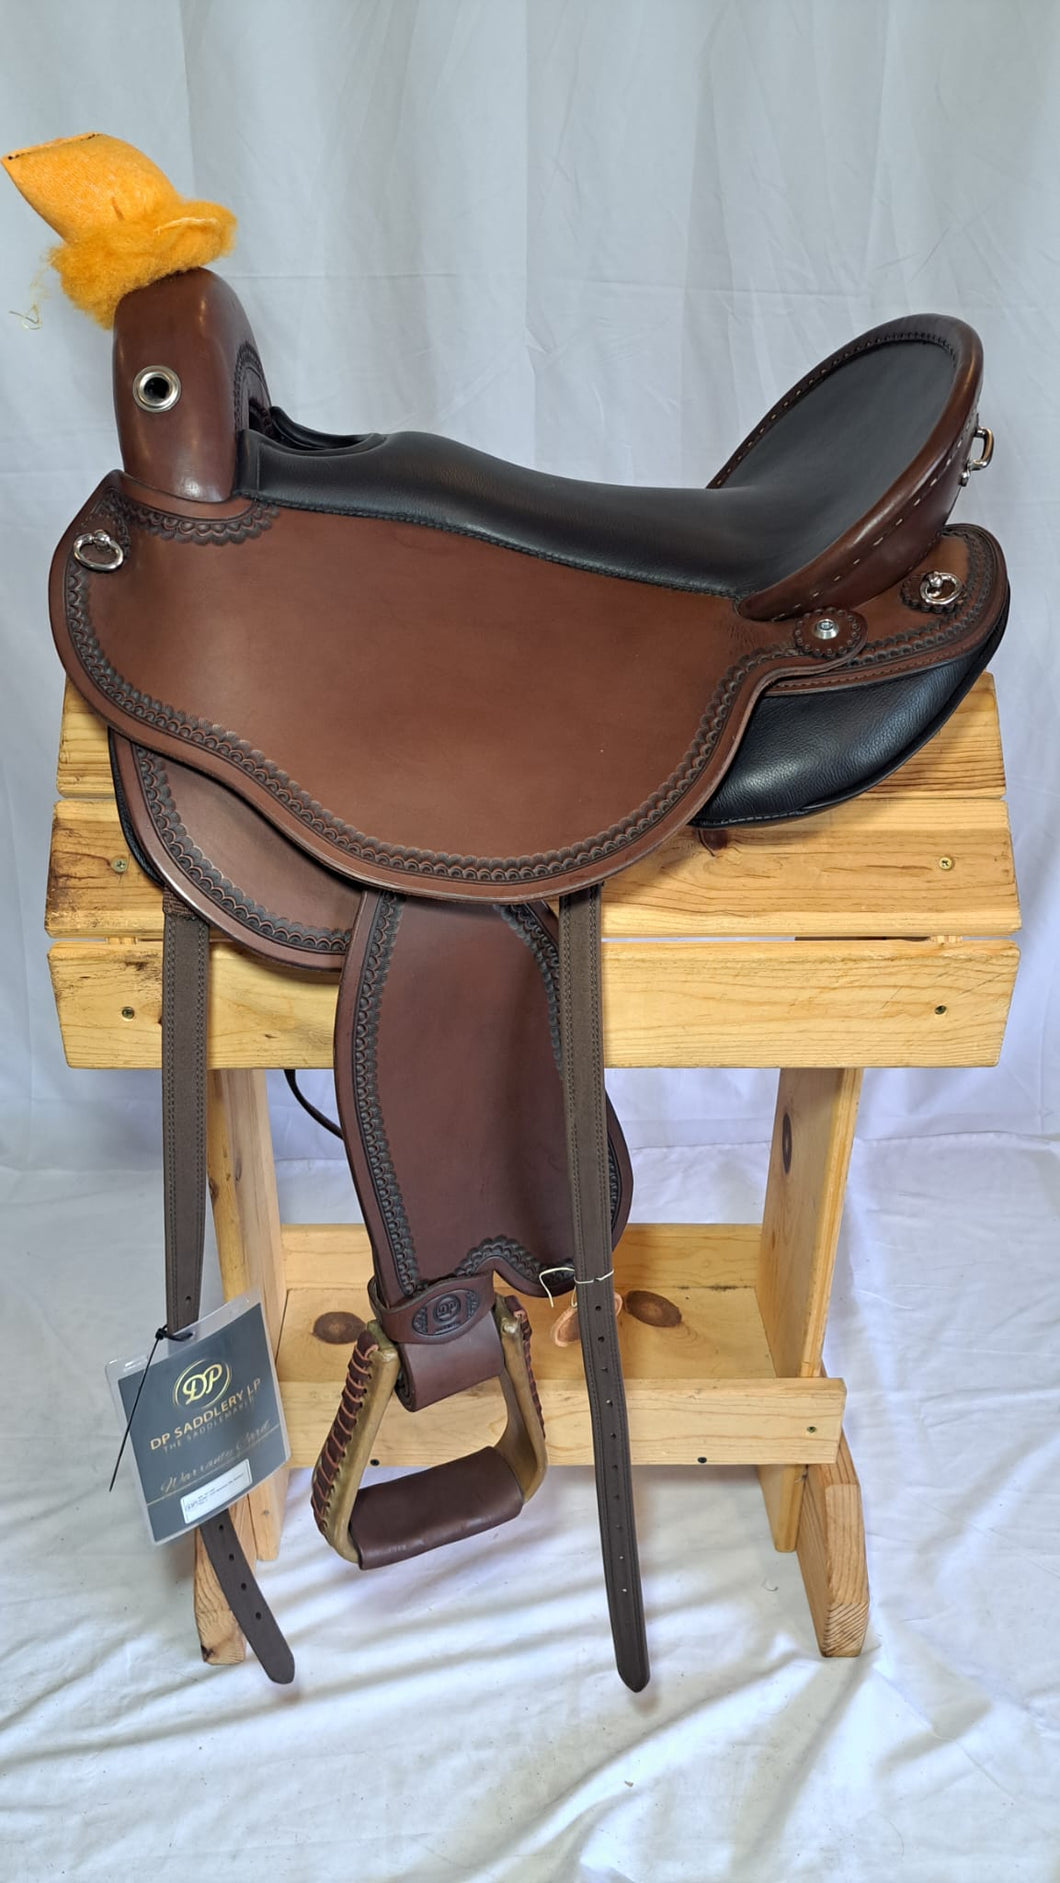 dp saddlery quantum short and light western 7195, side view on a wooden saddle rack, white background